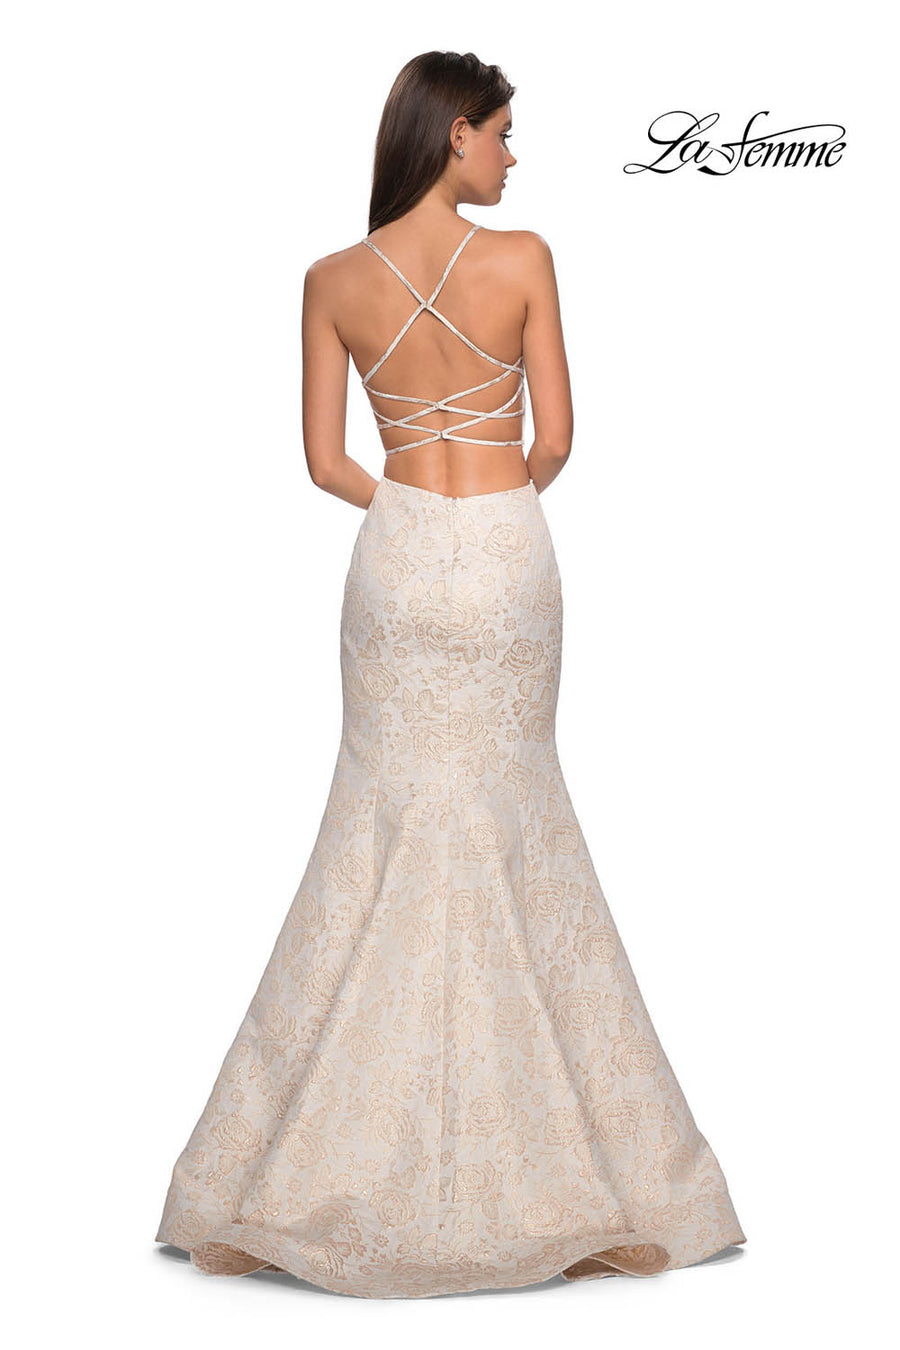 La Femme 27749 prom dress images.  La Femme 27749 is available in these colors: Ivory Gold.